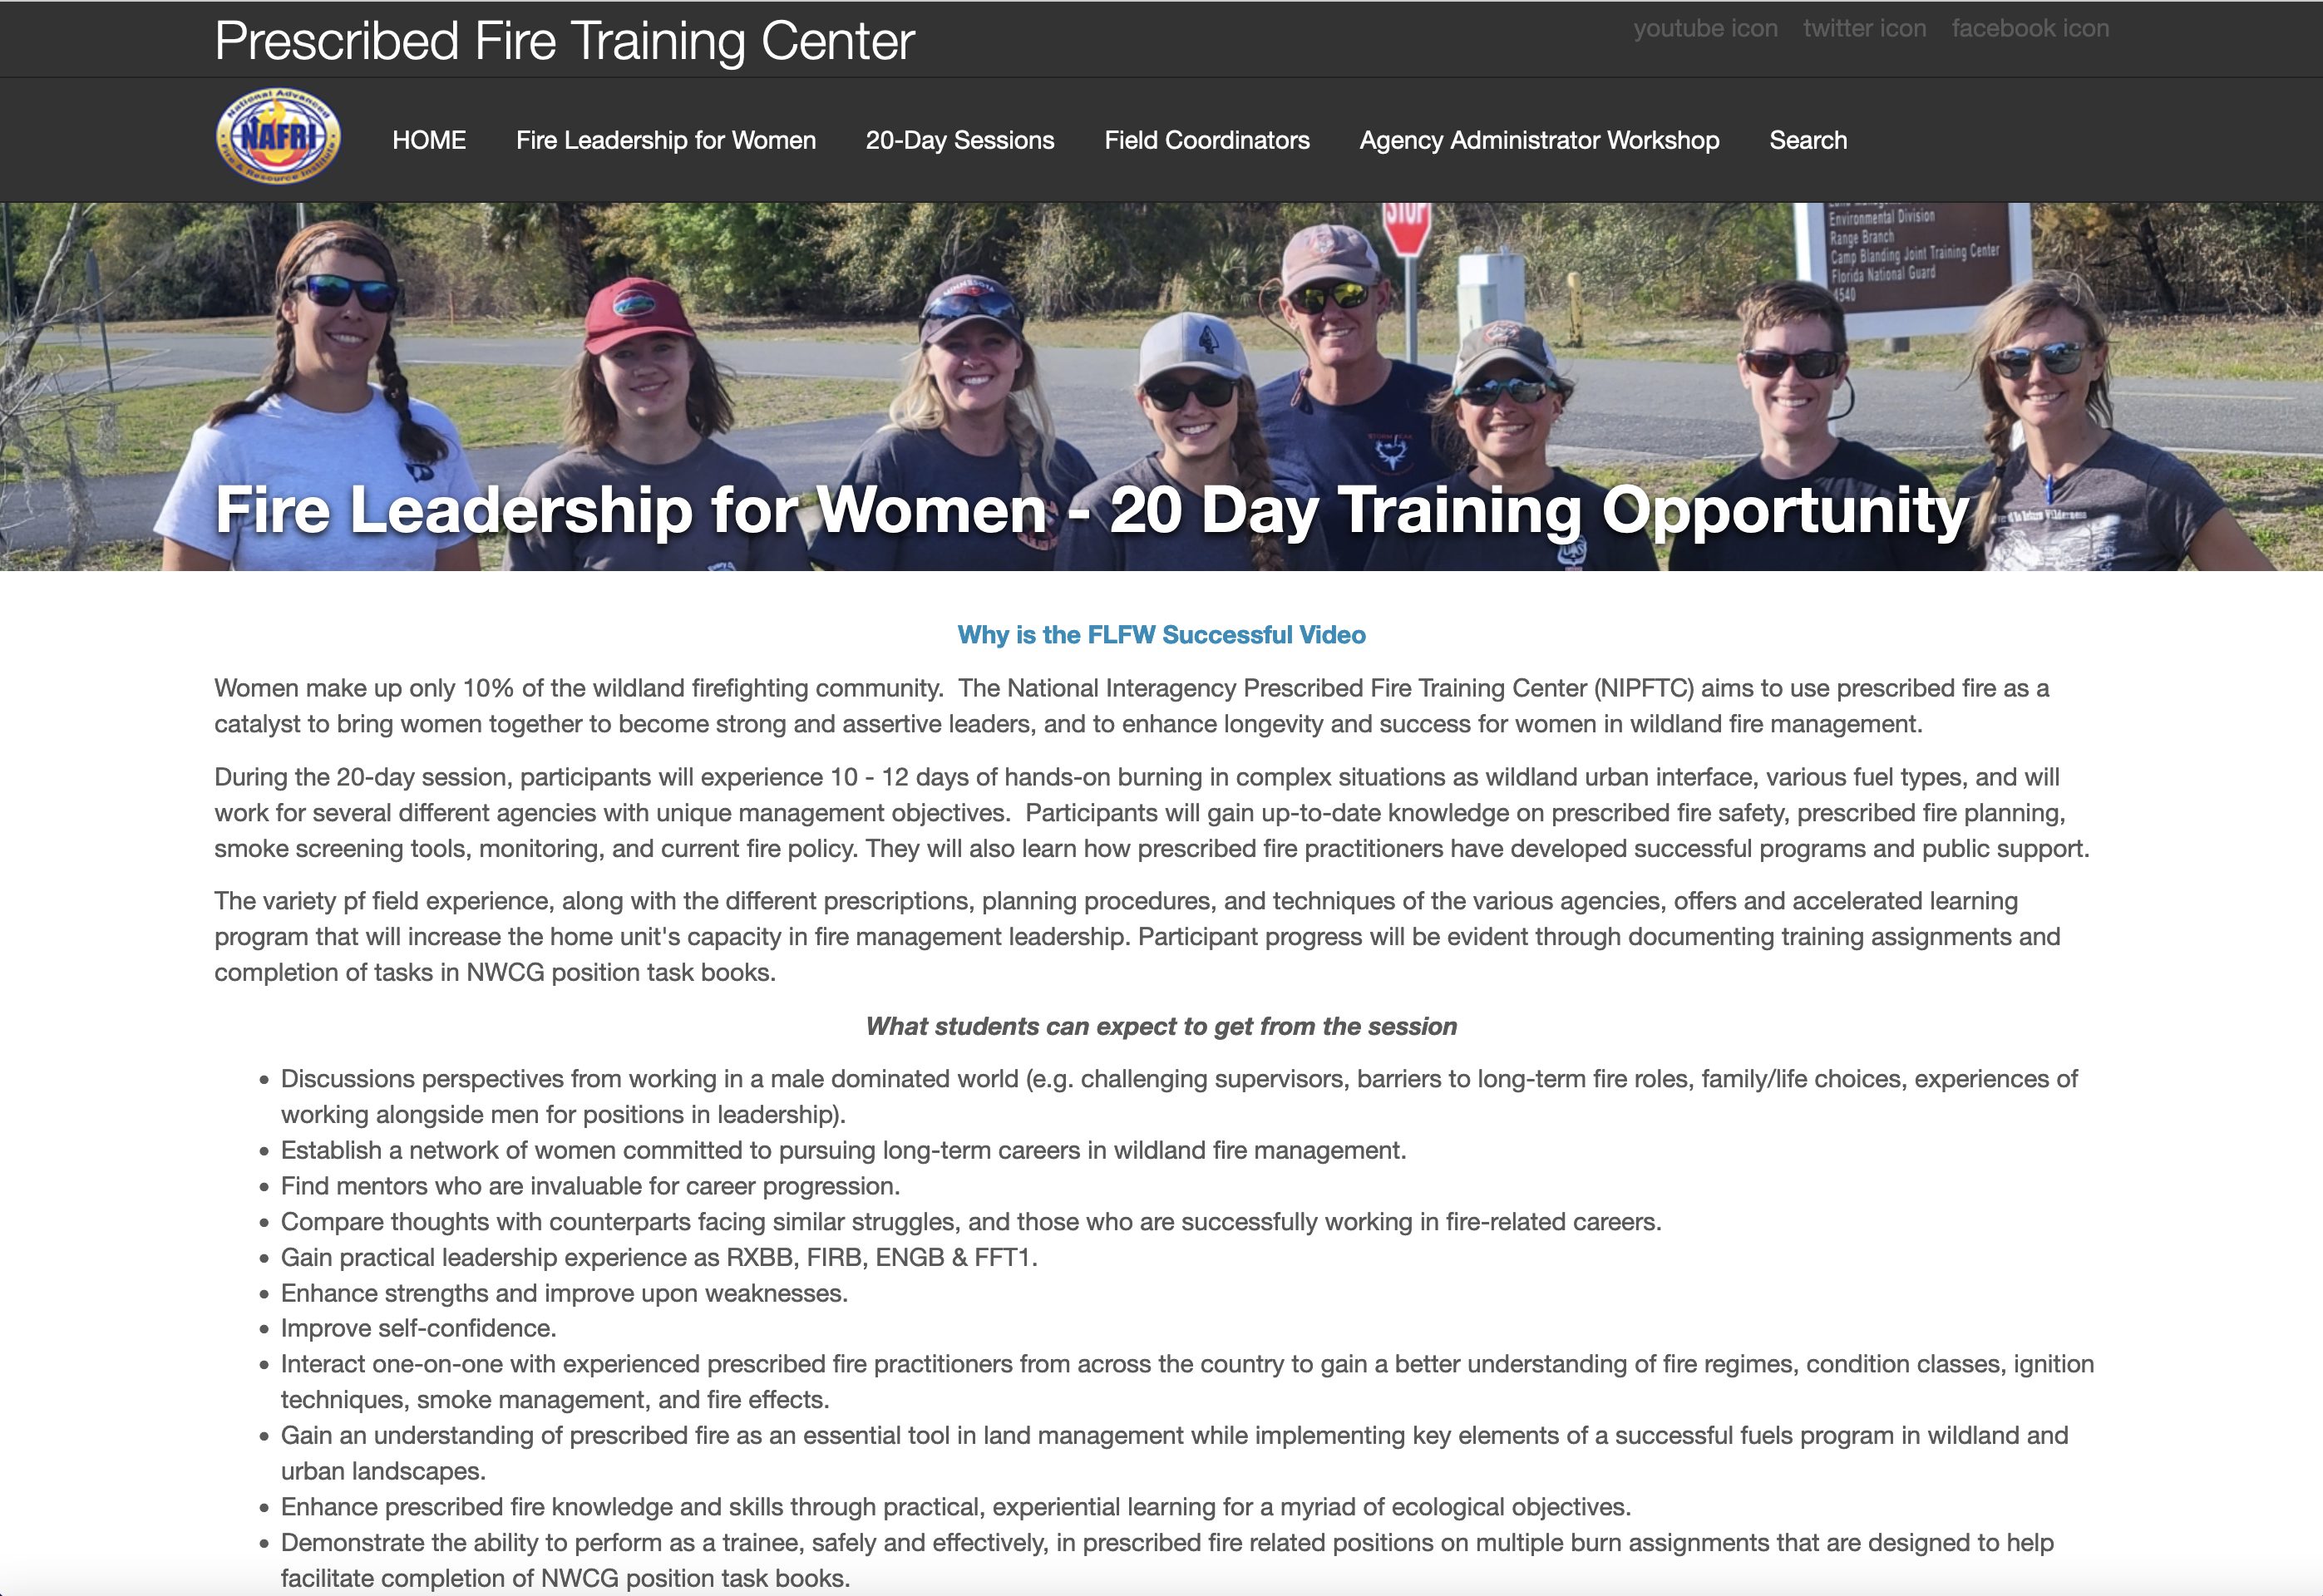 Fire Leadership for Women: Three 20-Day Training Opportunities in 2023